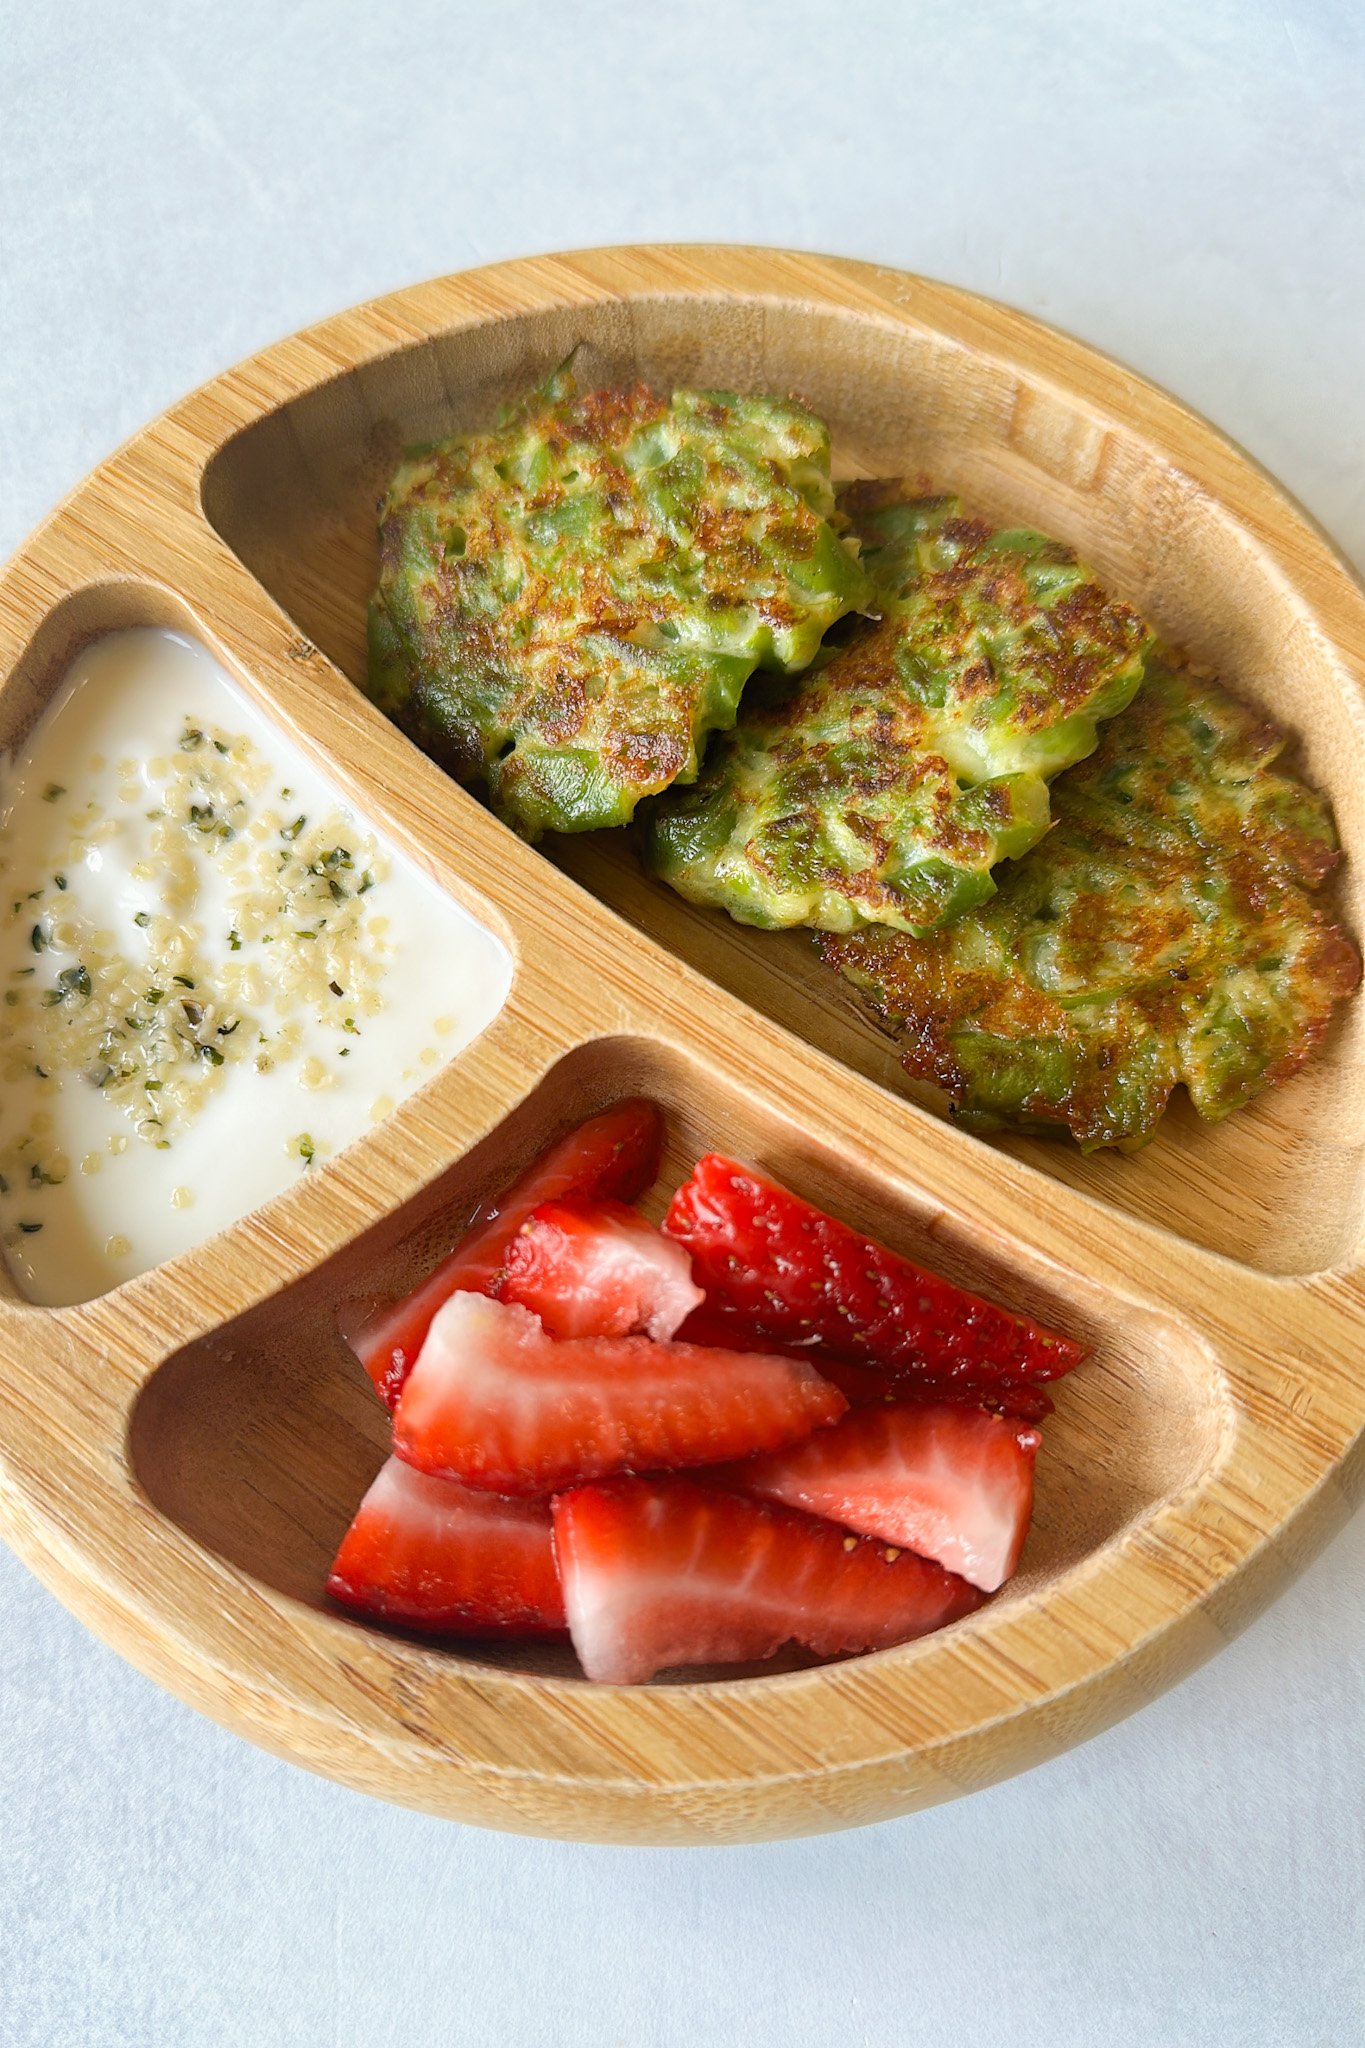 Green bean fritters served with yogurt dip and strawberries.